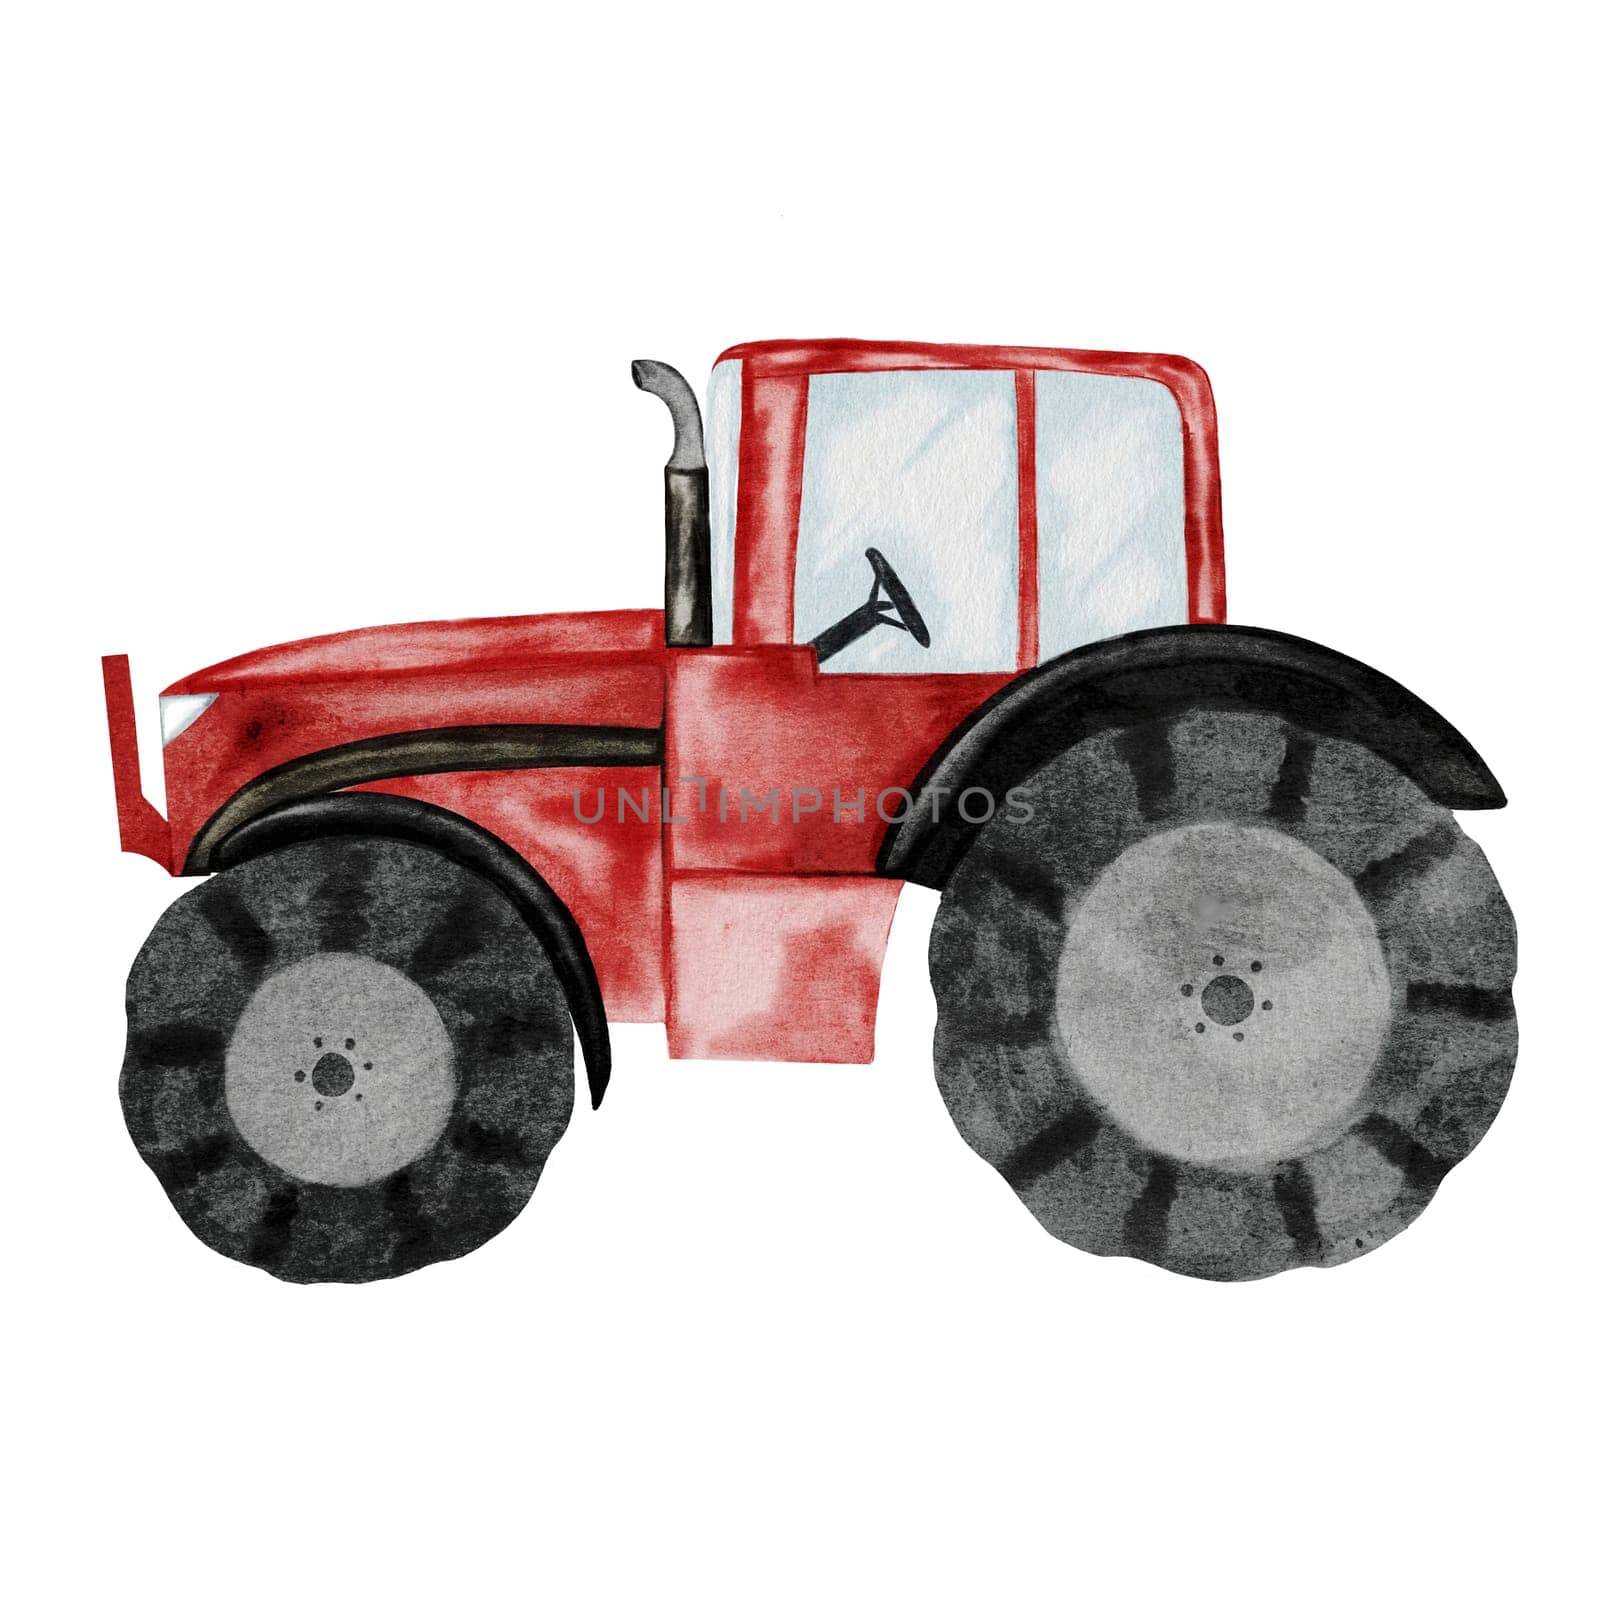 Tractor watercolor hand drawing. Clip art of a red toy car isolated on a white background. Illustration of an agricultural machine. For posters and cards, educational cards and game packaging by TatyanaTrushcheleva